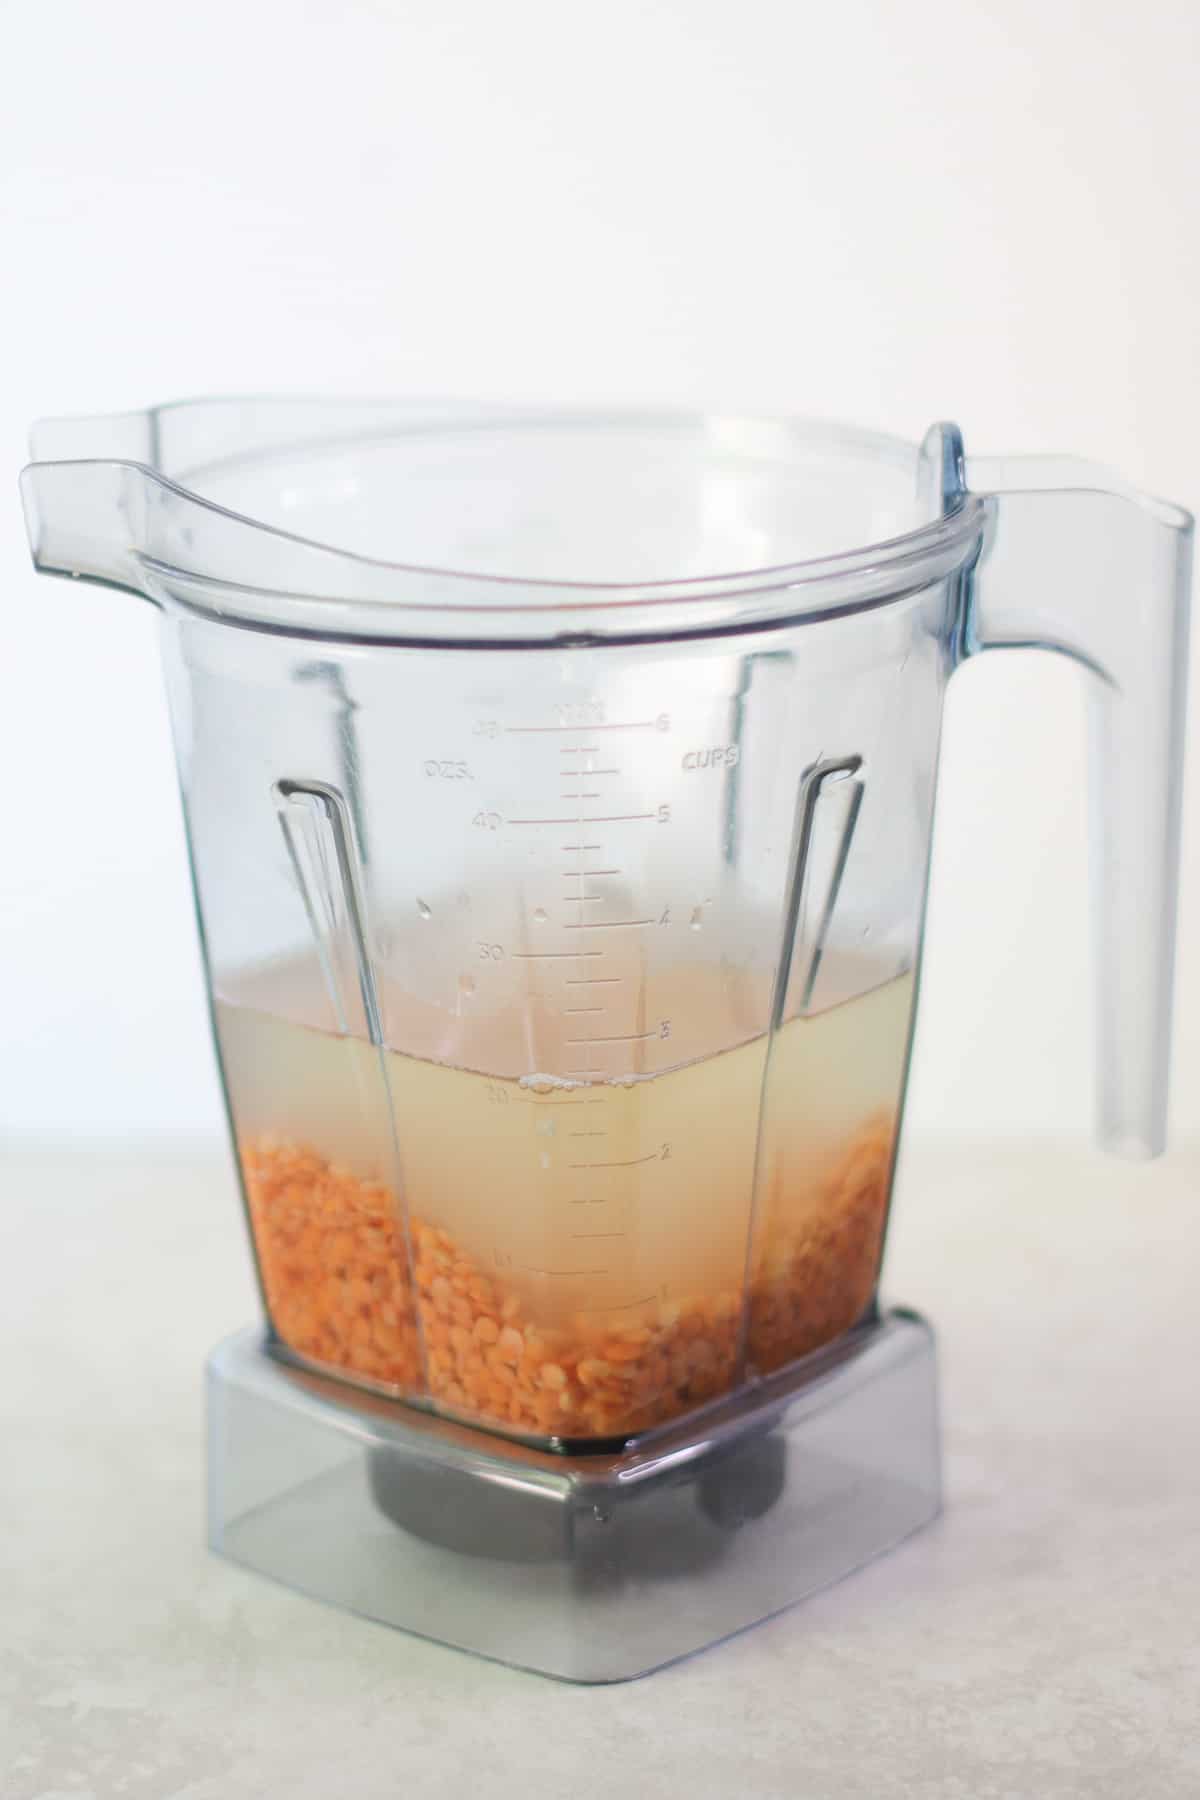 Red lentils with water in a blender.